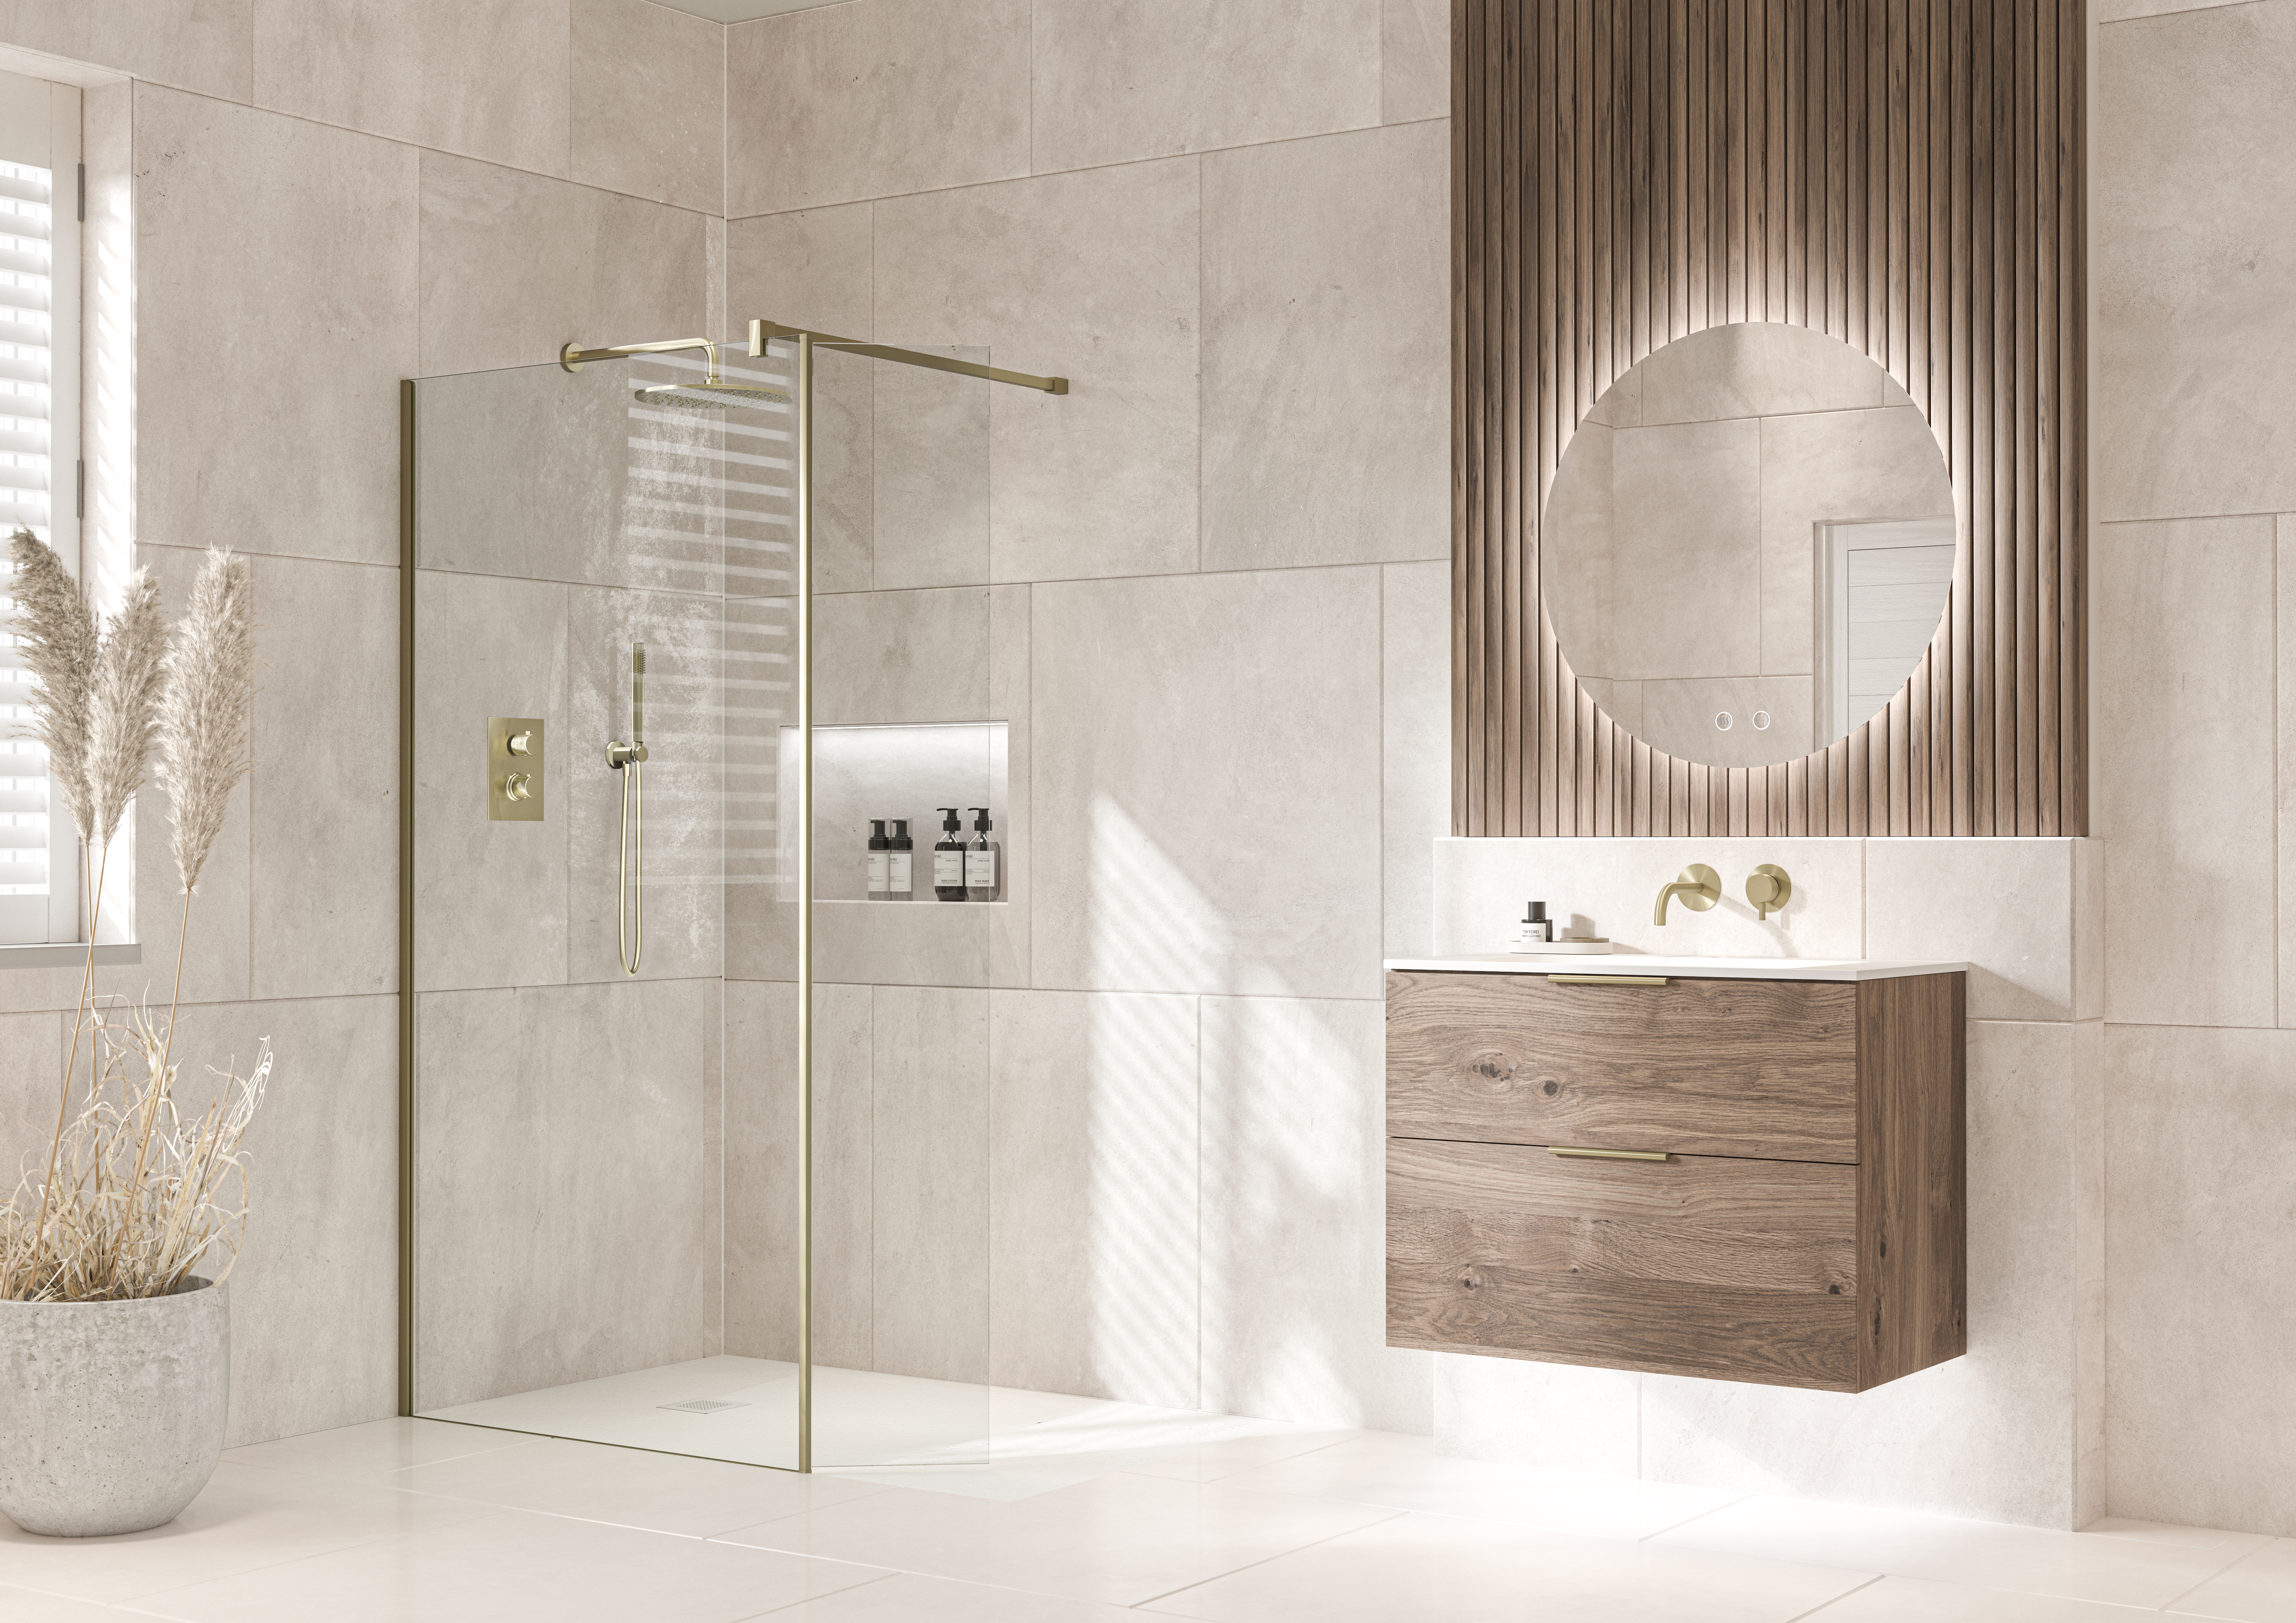 (c) Tissino - bathroom showing natural woods and botanicals